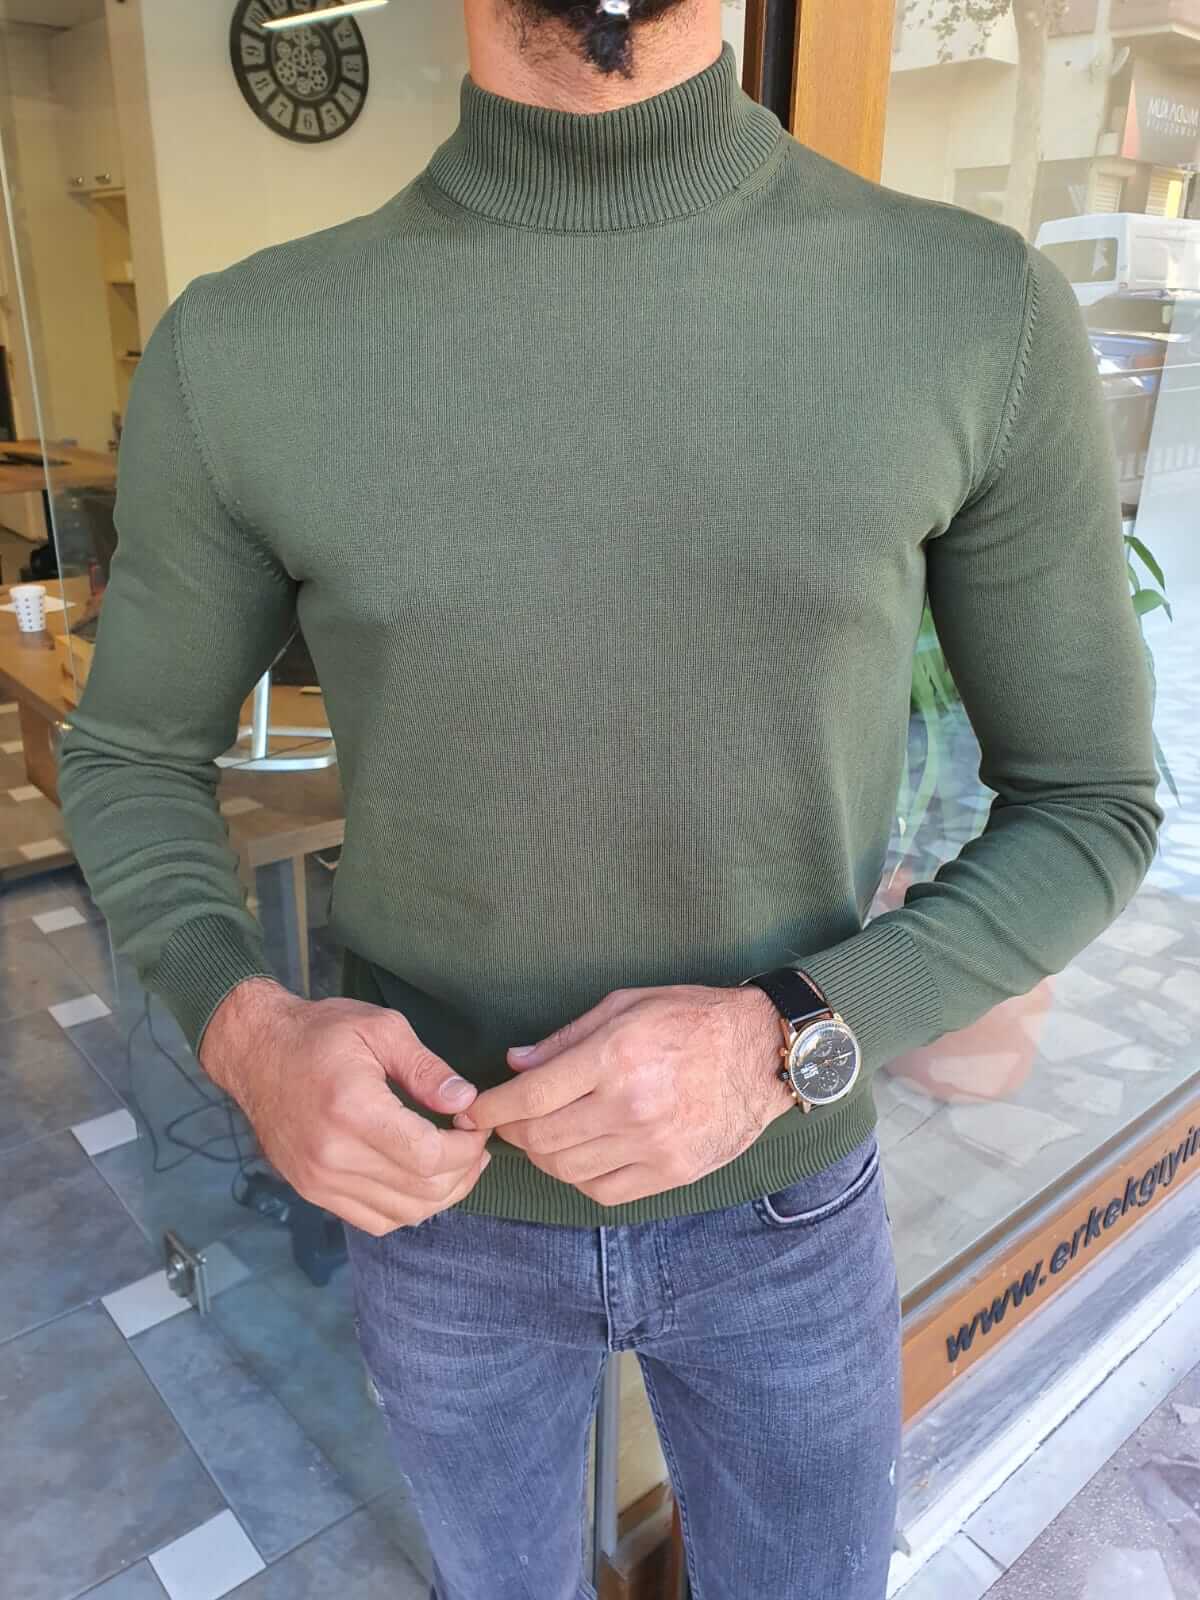 A vibrant Hunza Green Turtleneck sweater made of soft, ribbed fabric. The turtleneck features a snug fit and long sleeves, providing warmth and style.